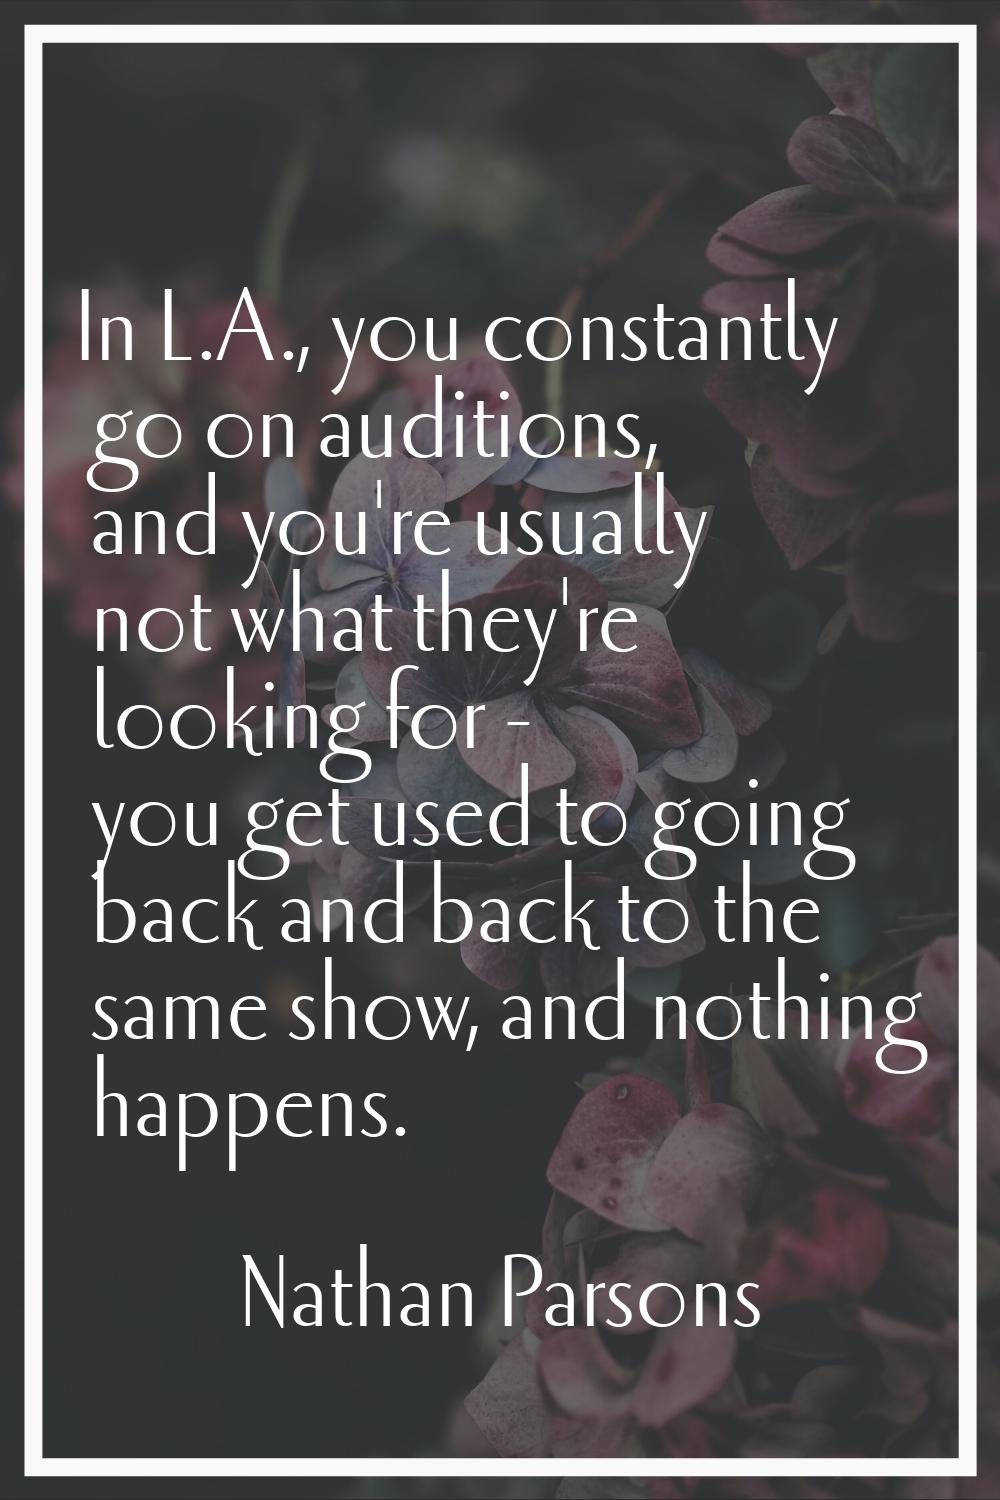 In L.A., you constantly go on auditions, and you're usually not what they're looking for - you get 